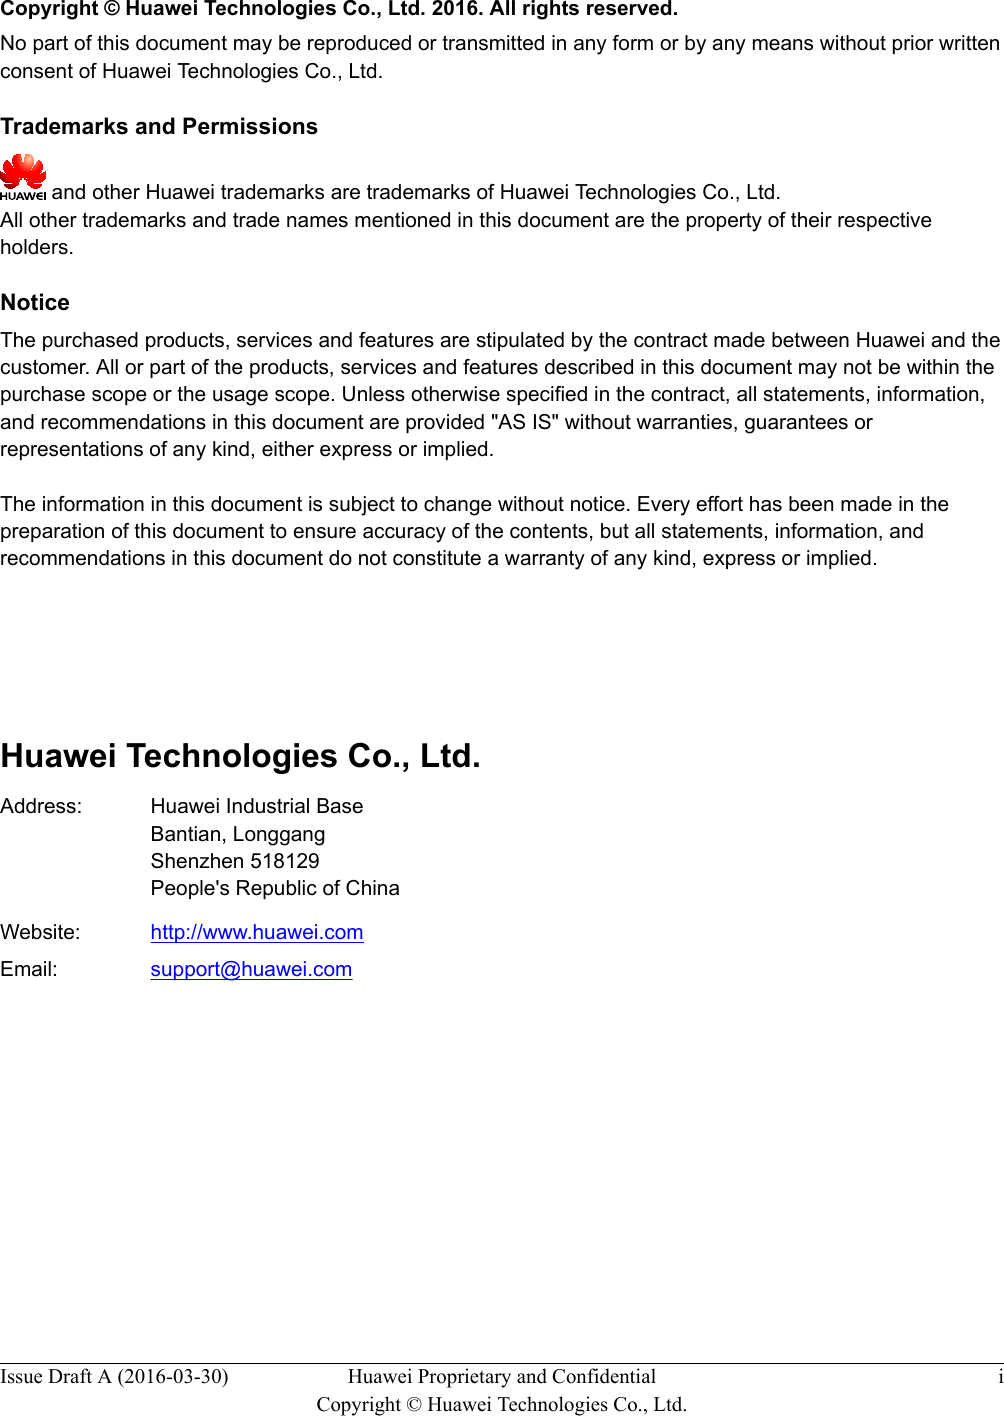   Copyright © Huawei Technologies Co., Ltd. 2016. All rights reserved.No part of this document may be reproduced or transmitted in any form or by any means without prior writtenconsent of Huawei Technologies Co., Ltd. Trademarks and Permissions and other Huawei trademarks are trademarks of Huawei Technologies Co., Ltd.All other trademarks and trade names mentioned in this document are the property of their respectiveholders. NoticeThe purchased products, services and features are stipulated by the contract made between Huawei and thecustomer. All or part of the products, services and features described in this document may not be within thepurchase scope or the usage scope. Unless otherwise specified in the contract, all statements, information,and recommendations in this document are provided &quot;AS IS&quot; without warranties, guarantees orrepresentations of any kind, either express or implied.The information in this document is subject to change without notice. Every effort has been made in thepreparation of this document to ensure accuracy of the contents, but all statements, information, andrecommendations in this document do not constitute a warranty of any kind, express or implied.        Huawei Technologies Co., Ltd.Address: Huawei Industrial BaseBantian, LonggangShenzhen 518129People&apos;s Republic of ChinaWebsite: http://www.huawei.comEmail: support@huawei.comIssue Draft A (2016-03-30) Huawei Proprietary and ConfidentialCopyright © Huawei Technologies Co., Ltd.i